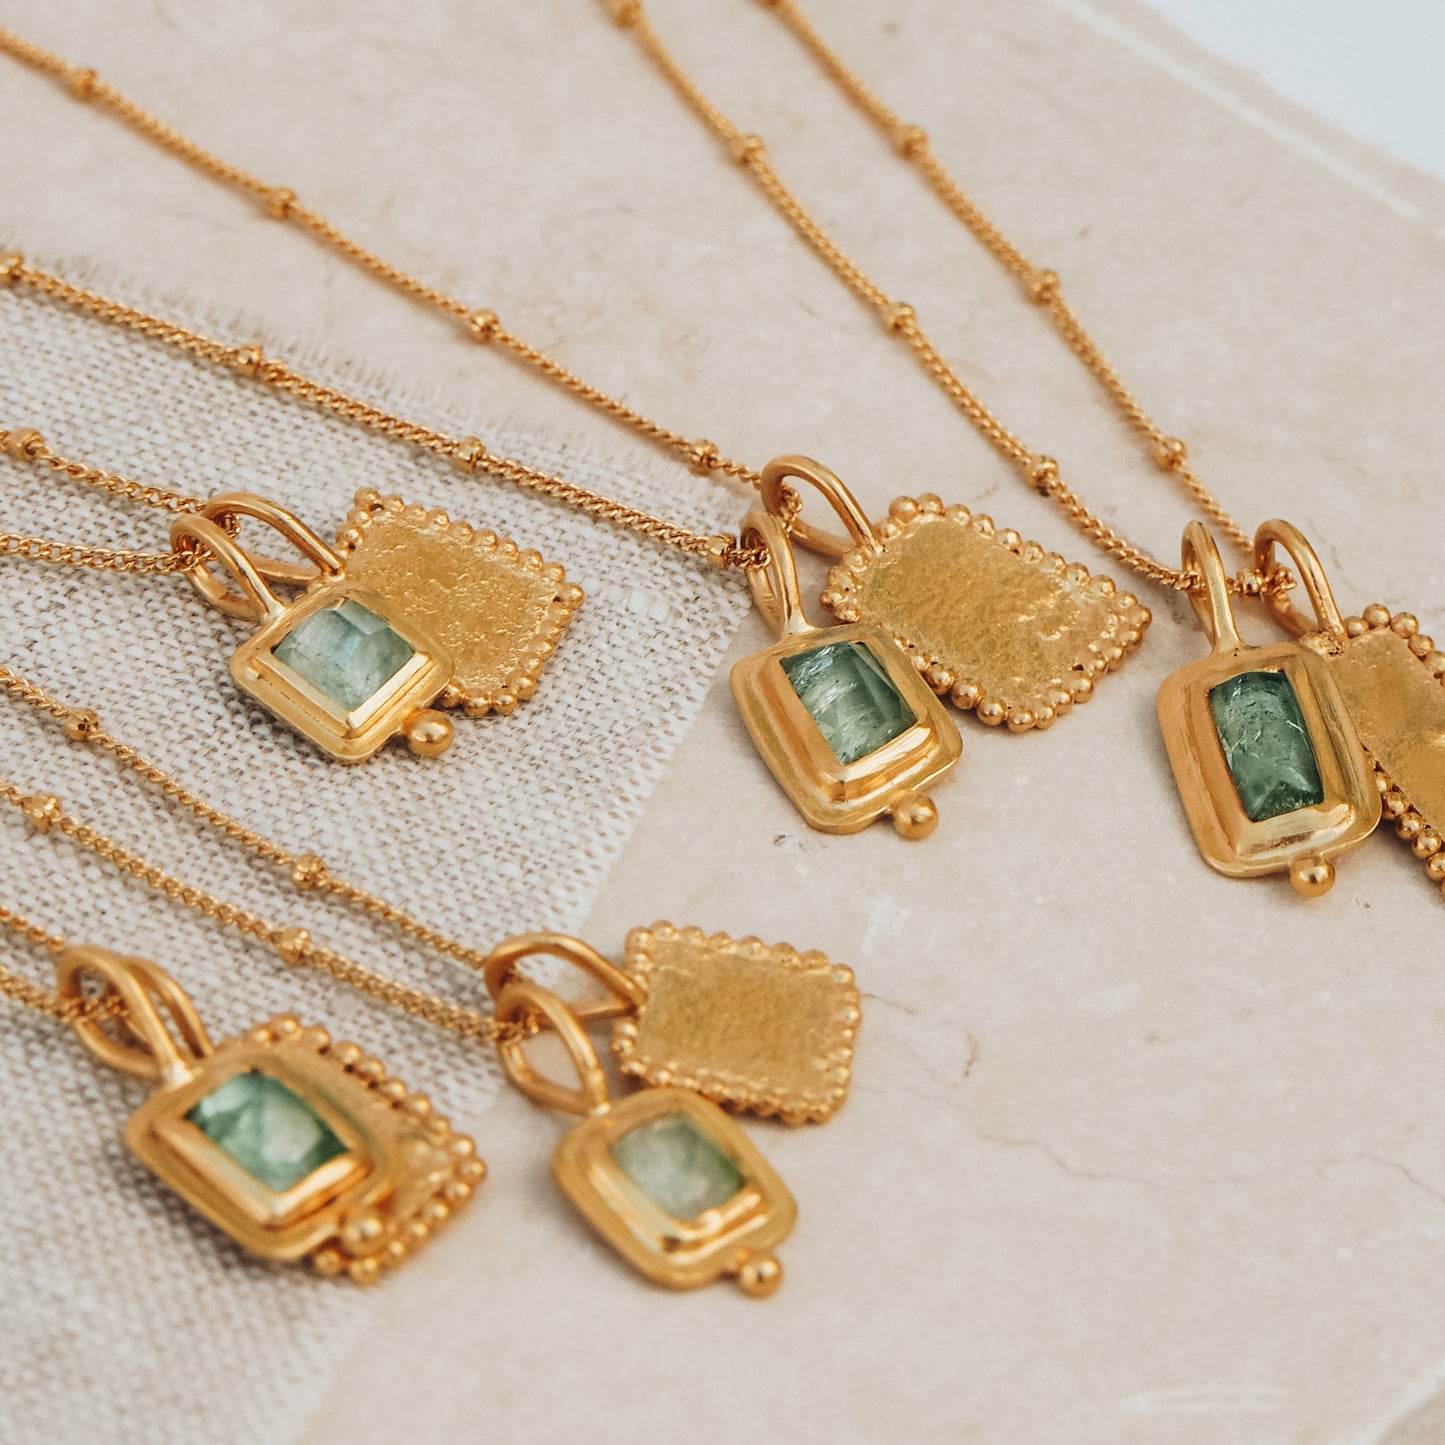 Handmade gold necklaces with square pendants, showcasing the allure of ocean blue rose cut tourmaline gemstones, textured surfaces, and meticulous granulation detailing.